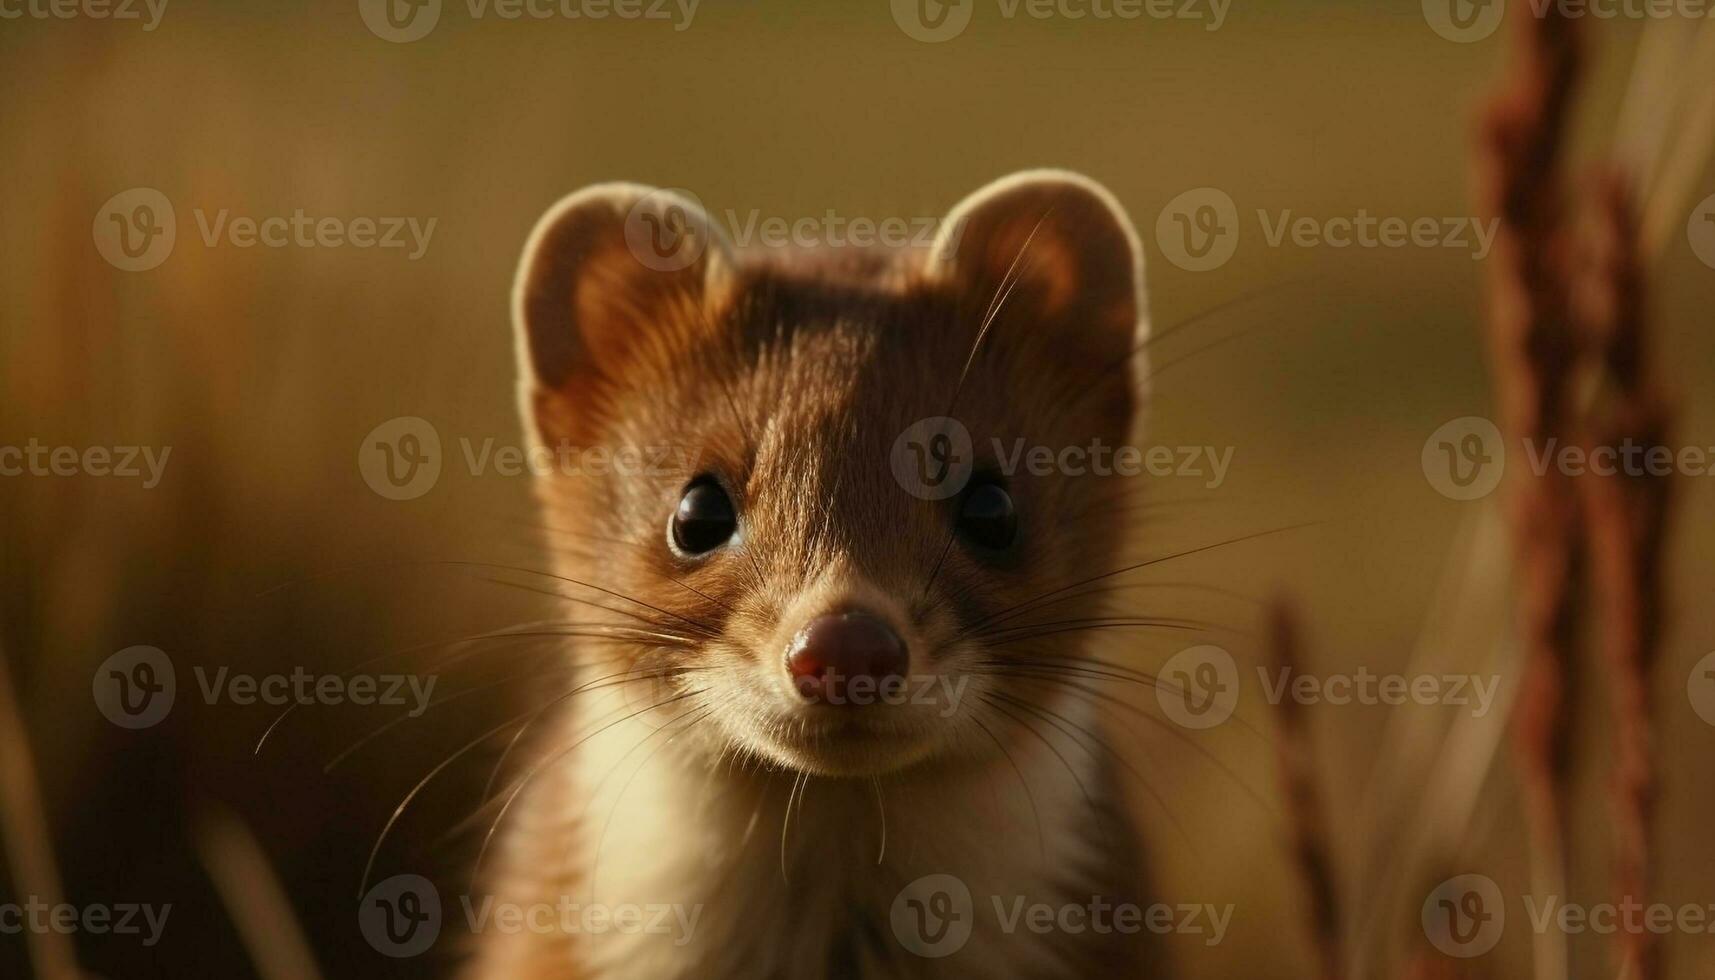 Cute mammal, small and fluffy, with a playful curiosity generated by AI photo